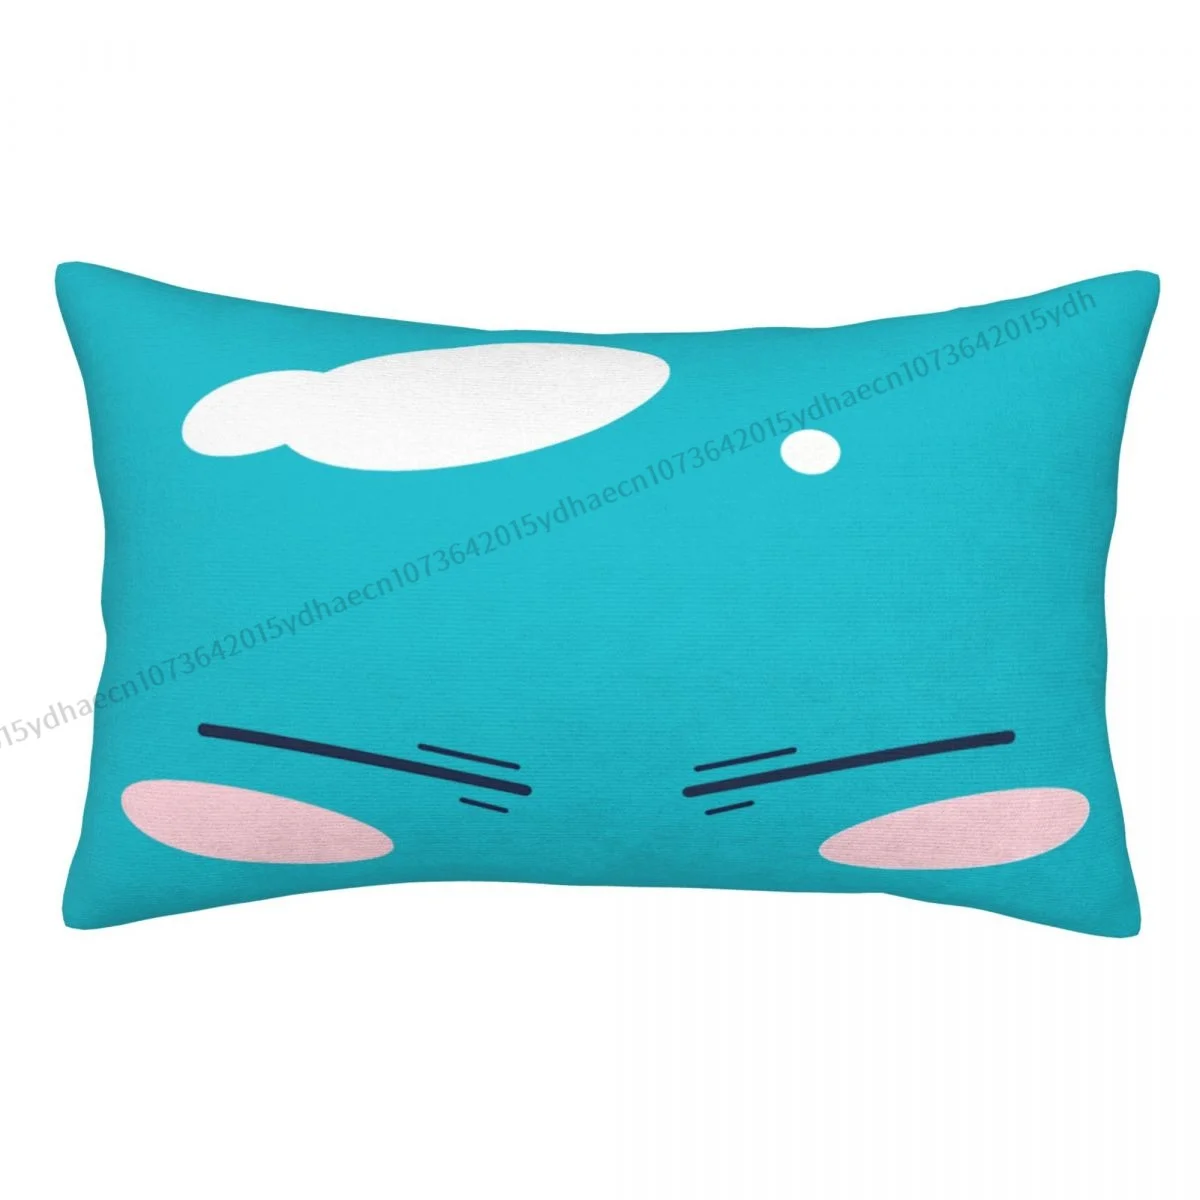 Rimuru Face Slime Chibi Printed Pillow Case That Time I Got Reincarnated As a Slime Backpack Coussin Cover Sofa Decor Pillowcase